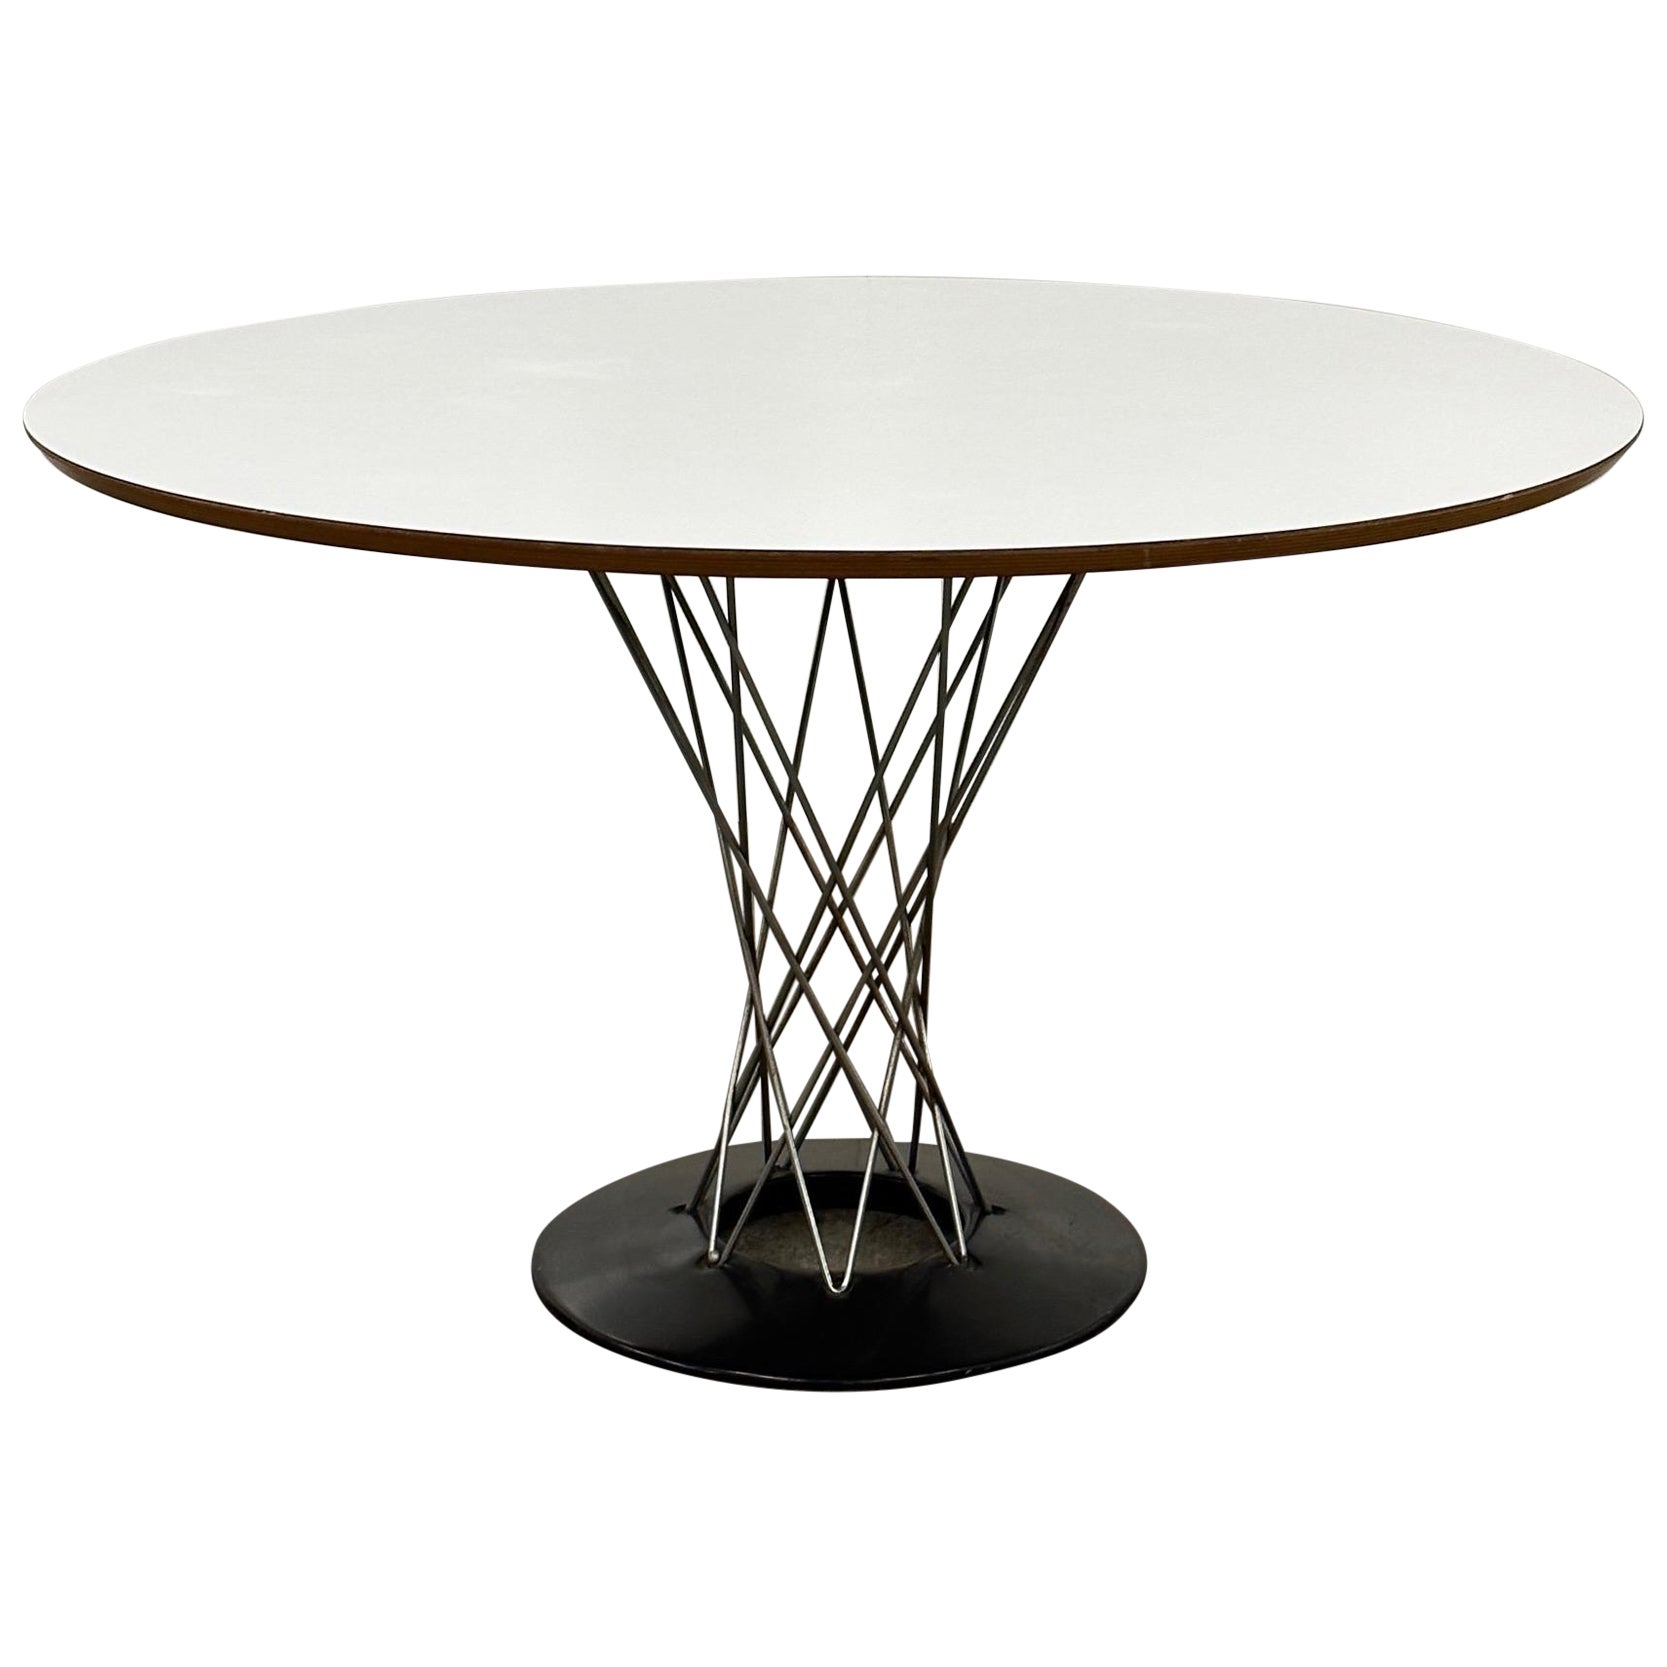 Cyclone Dining Table by Isamu Noguchi for Knoll